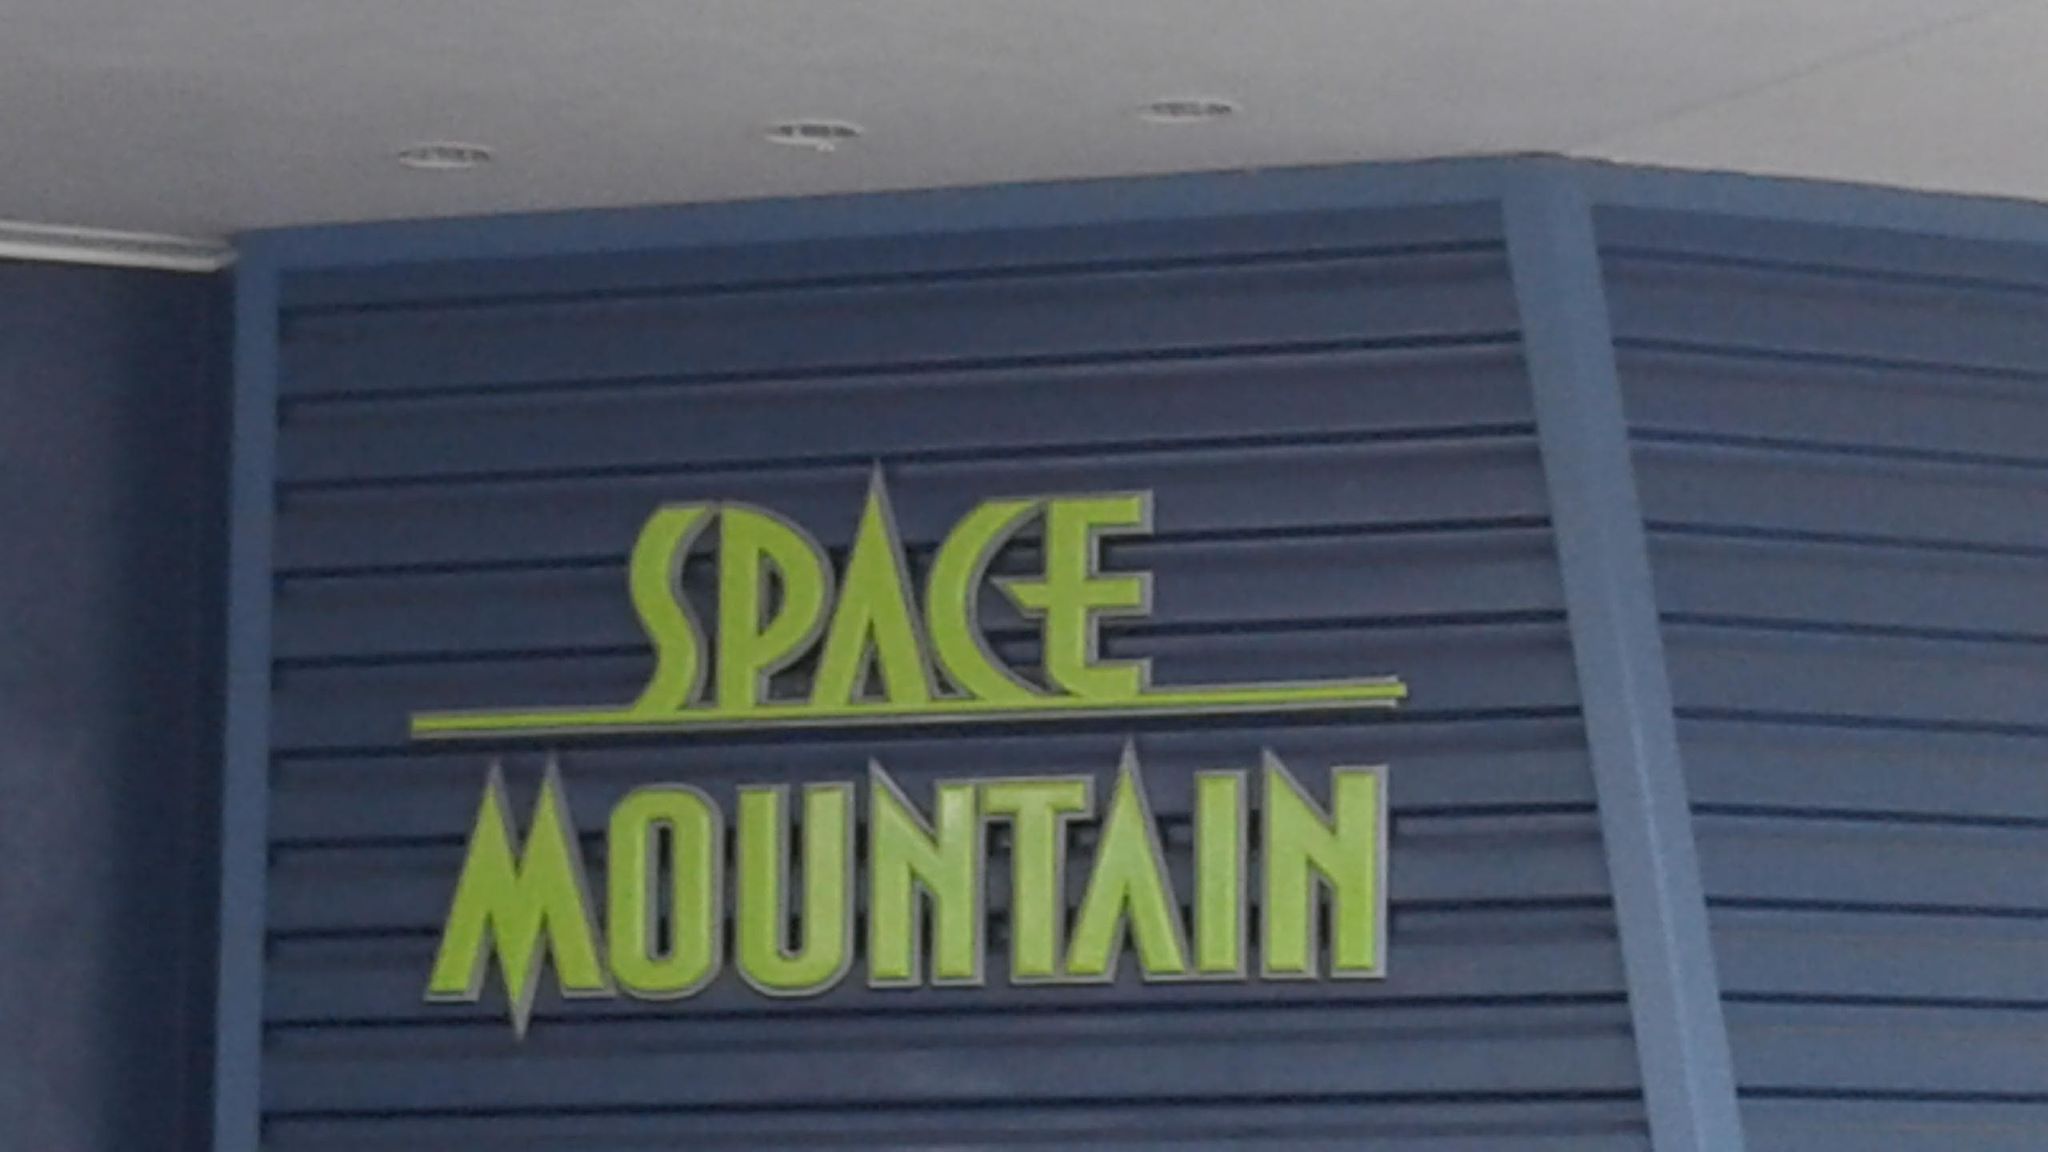 The Exit From Space Mountain is Currently Under Refurbishment